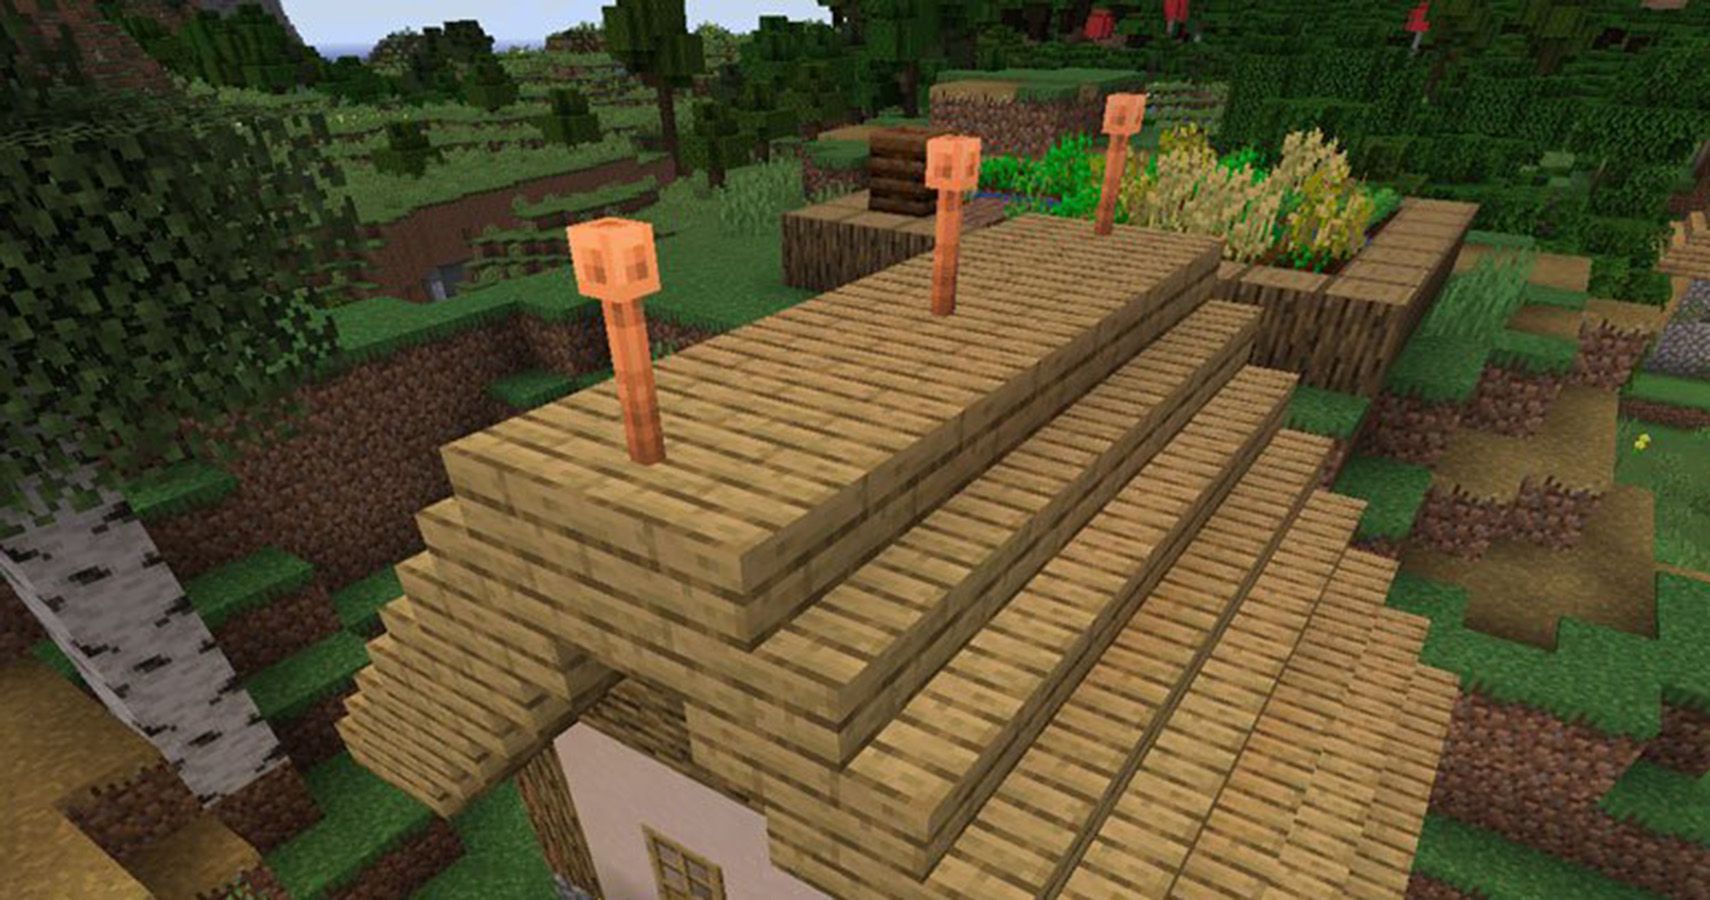 Resten vand blomsten oversættelse Minecraft: Everything You Need To Know About The Lightning Rod